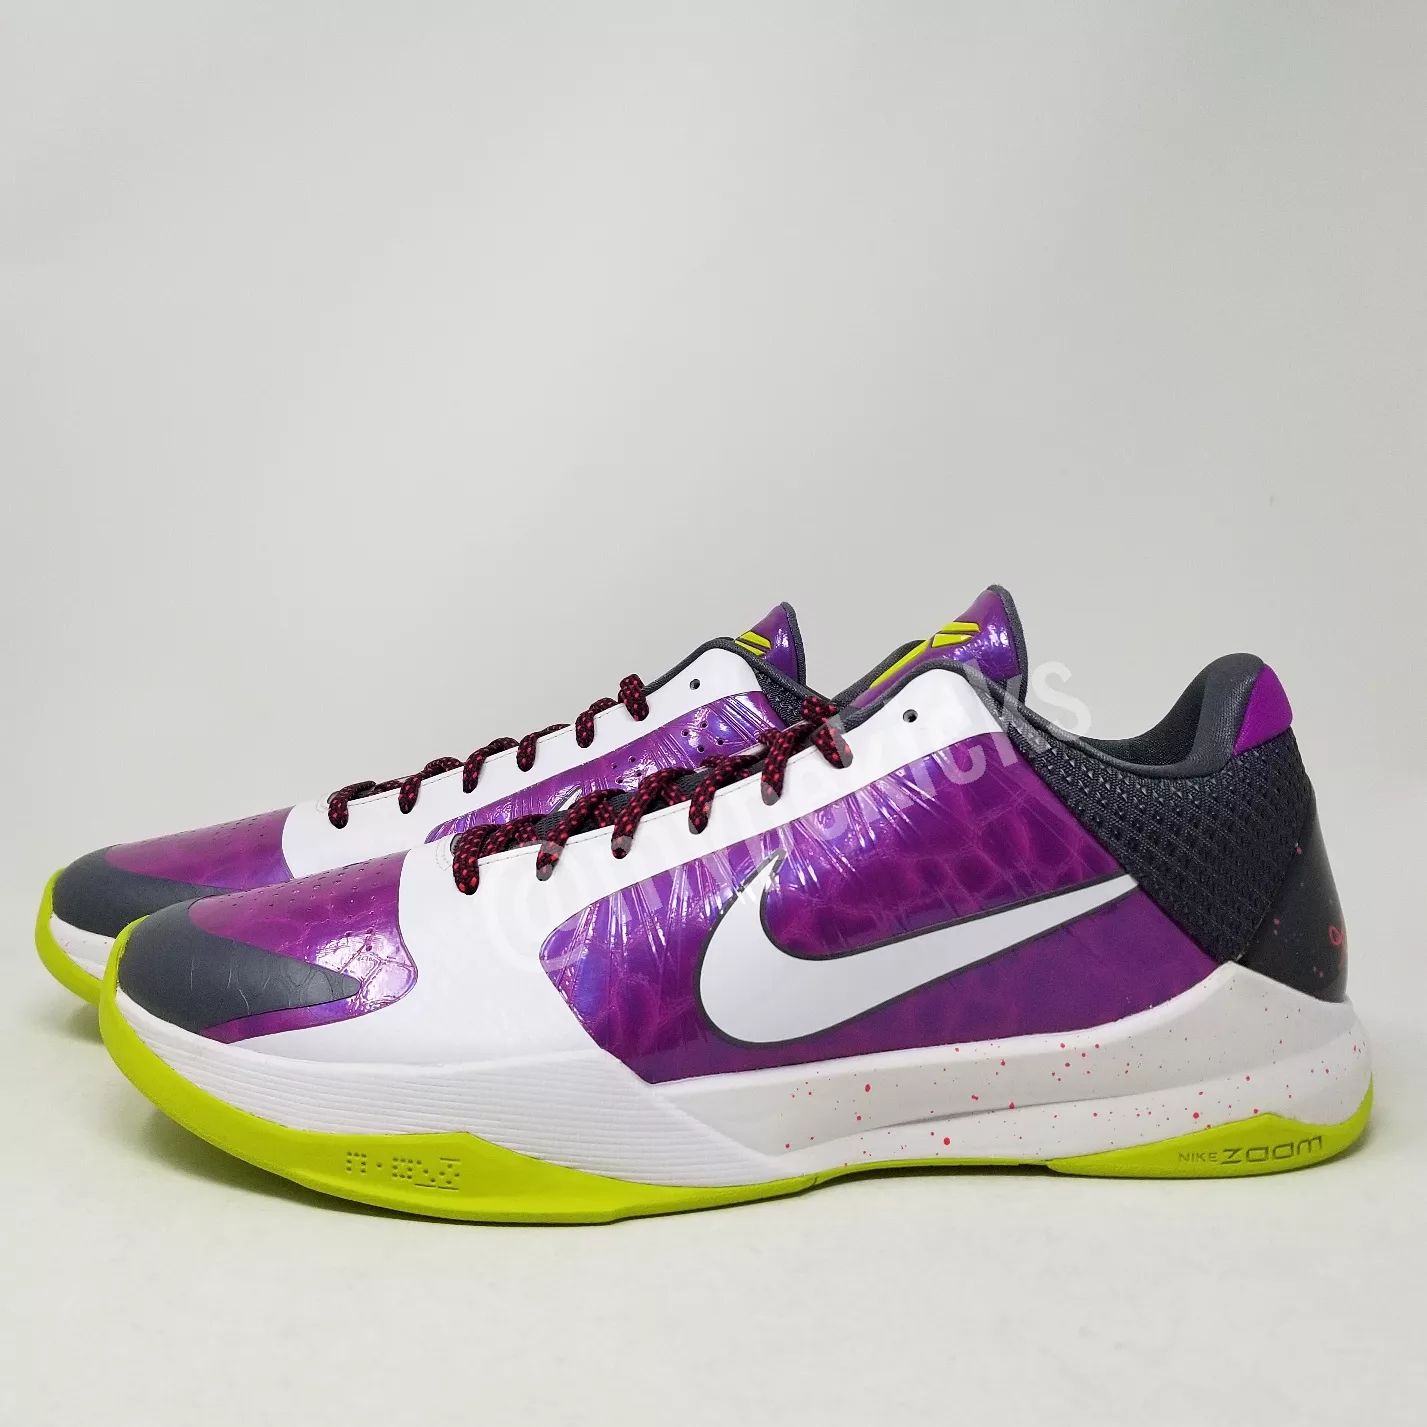 Nike Kobe 5 Devin Booker Suns Player Exclusive